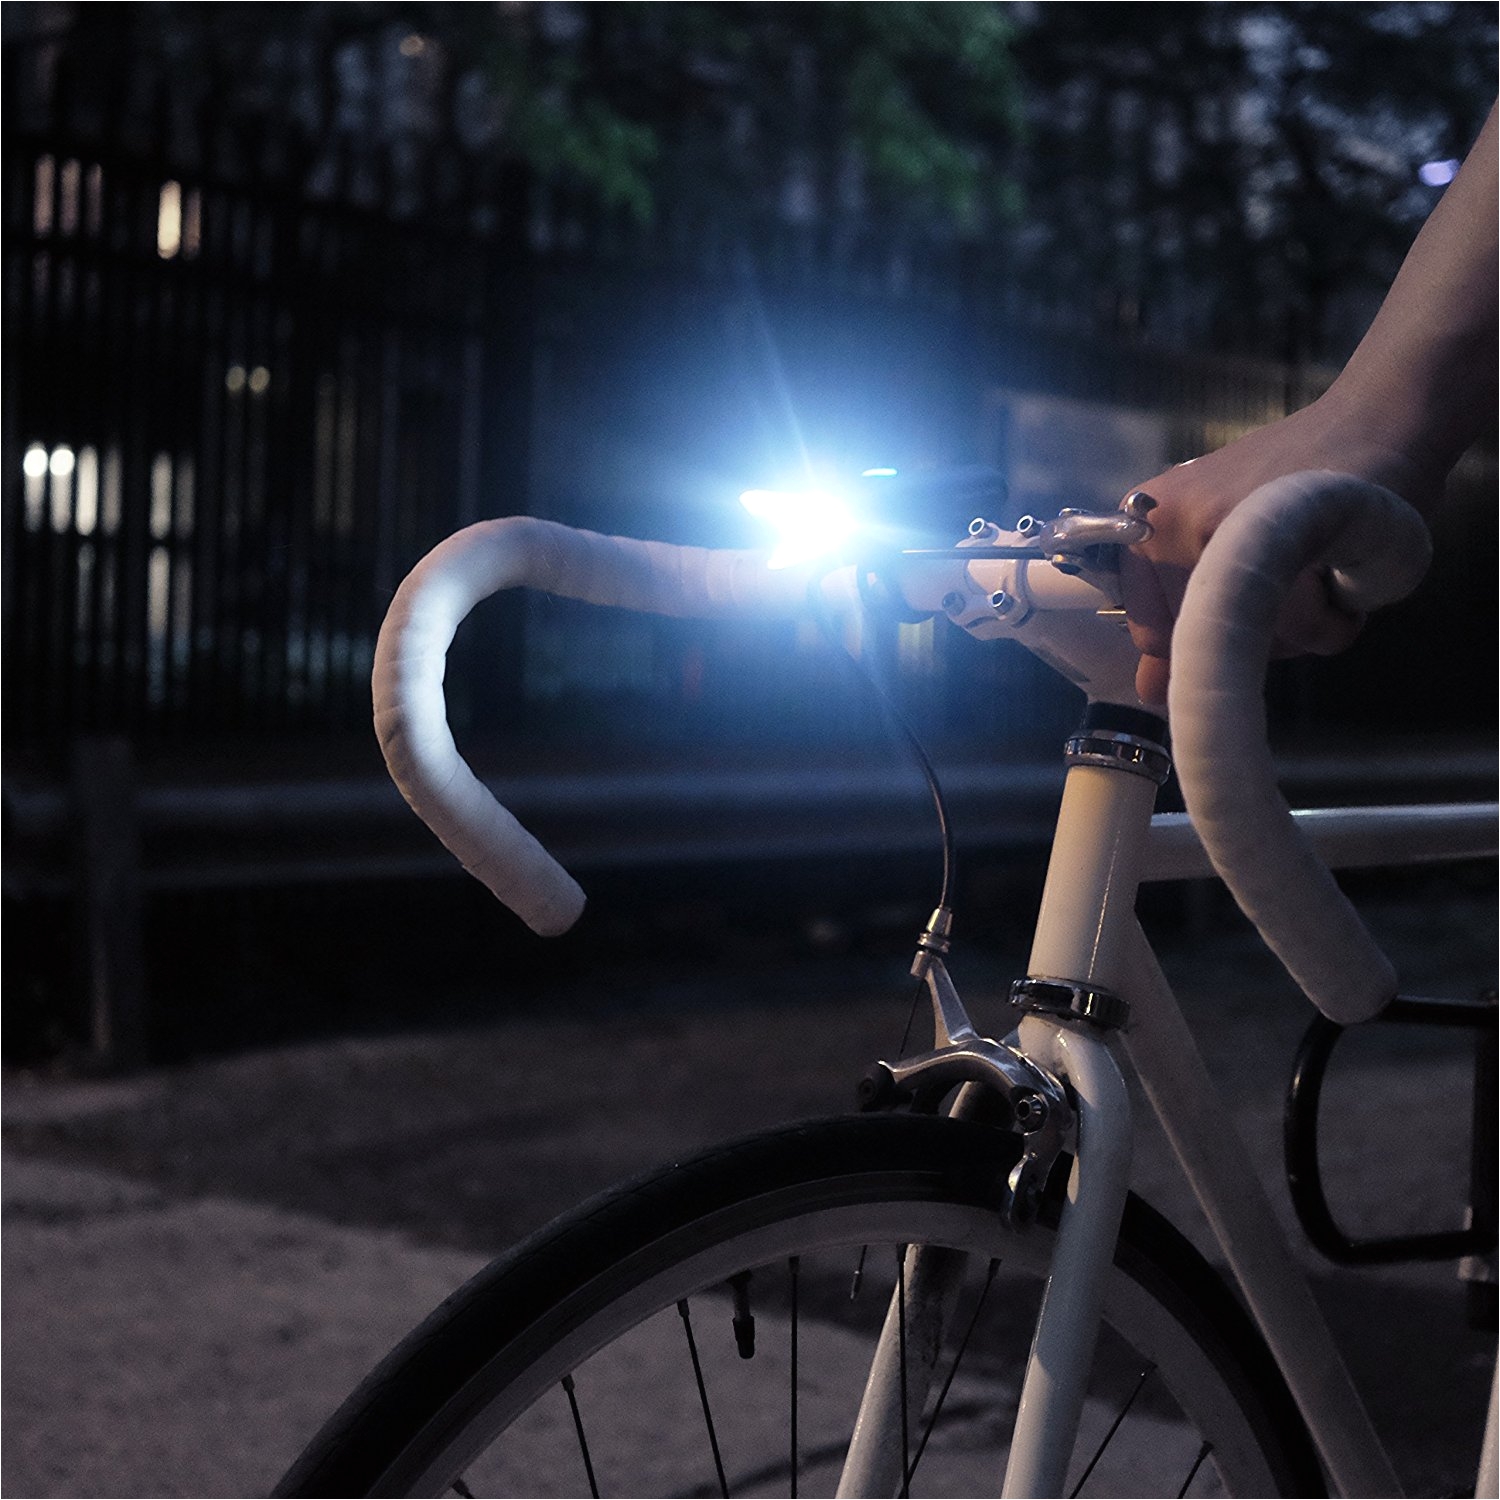 amazon com cycle torch superbright bike light usb rechargeable led free taillight included shark 500 set 500 lumens fits all bikes hybrid road